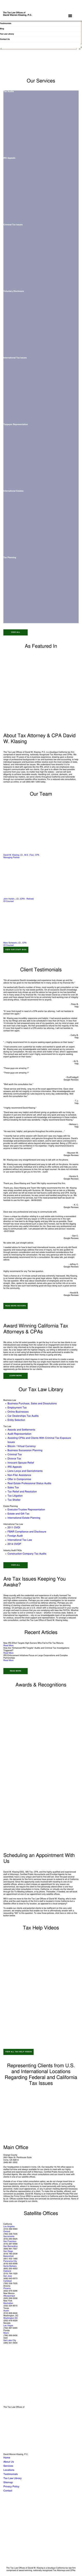 Tax Law Offices of David W. Klasing - Los Angeles CA Lawyers